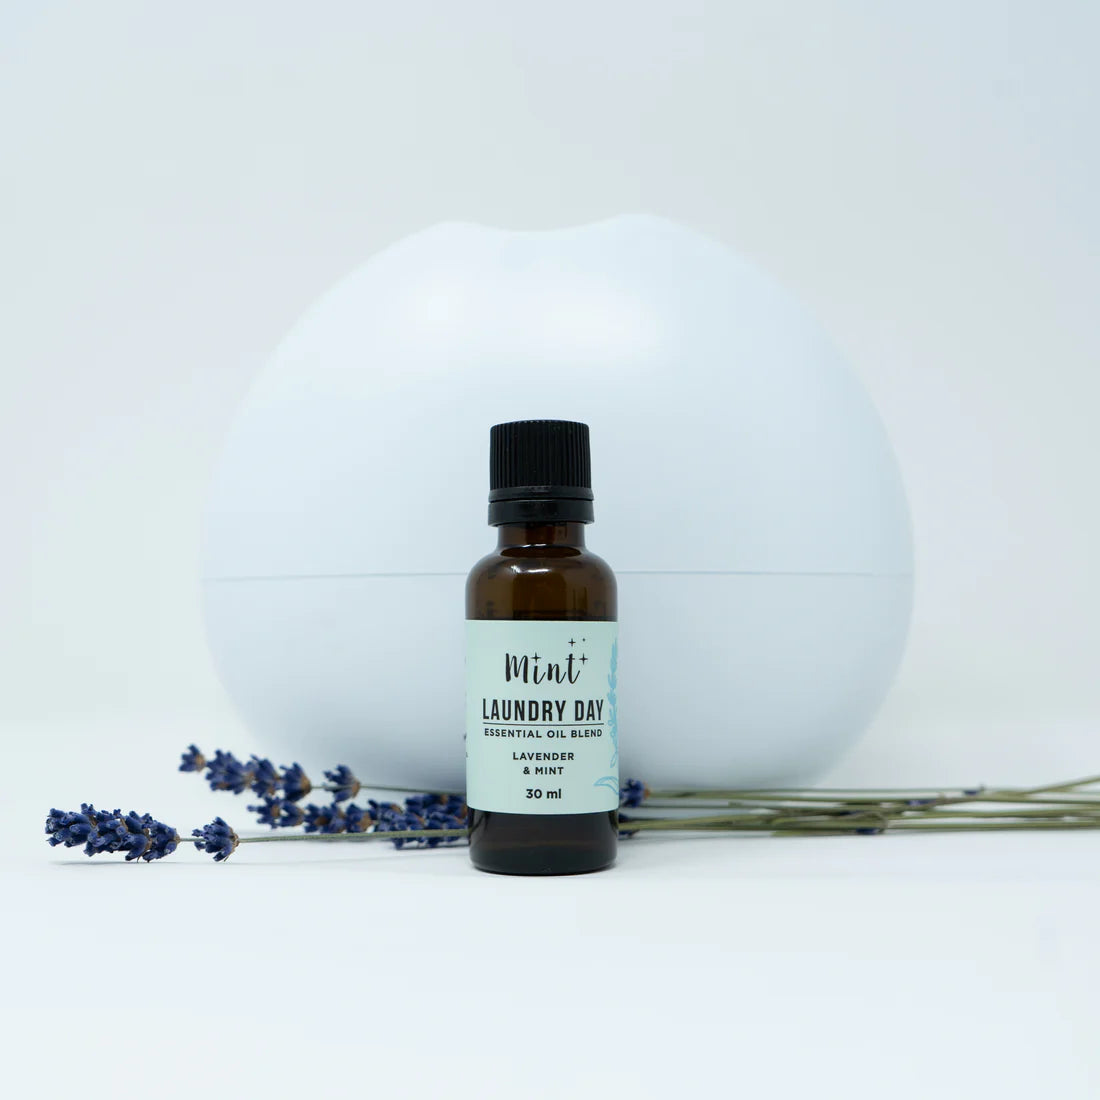 Mint Cleaning Laundry Day- Essential Oil Blend